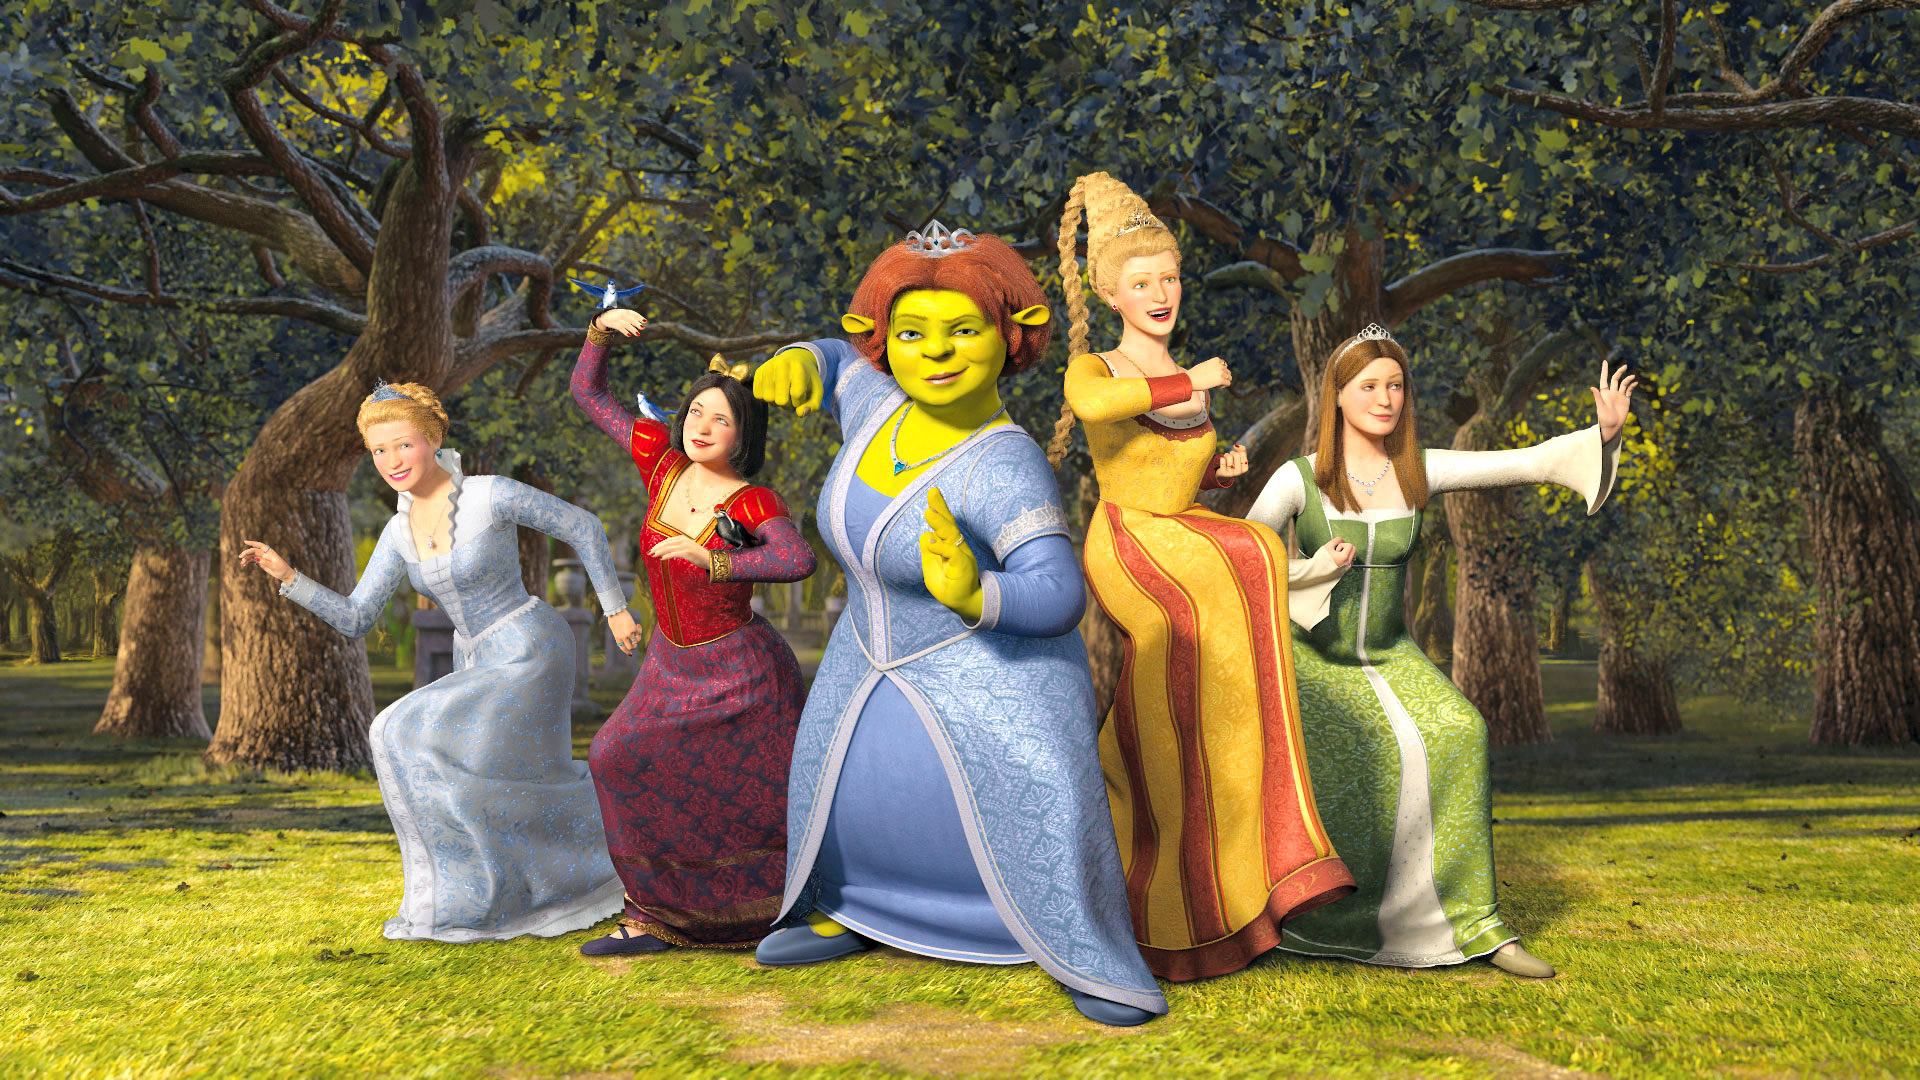 Fiona wallpapers, Shrek 2 movie, Animated characters, Magical moments, 1920x1080 Full HD Desktop